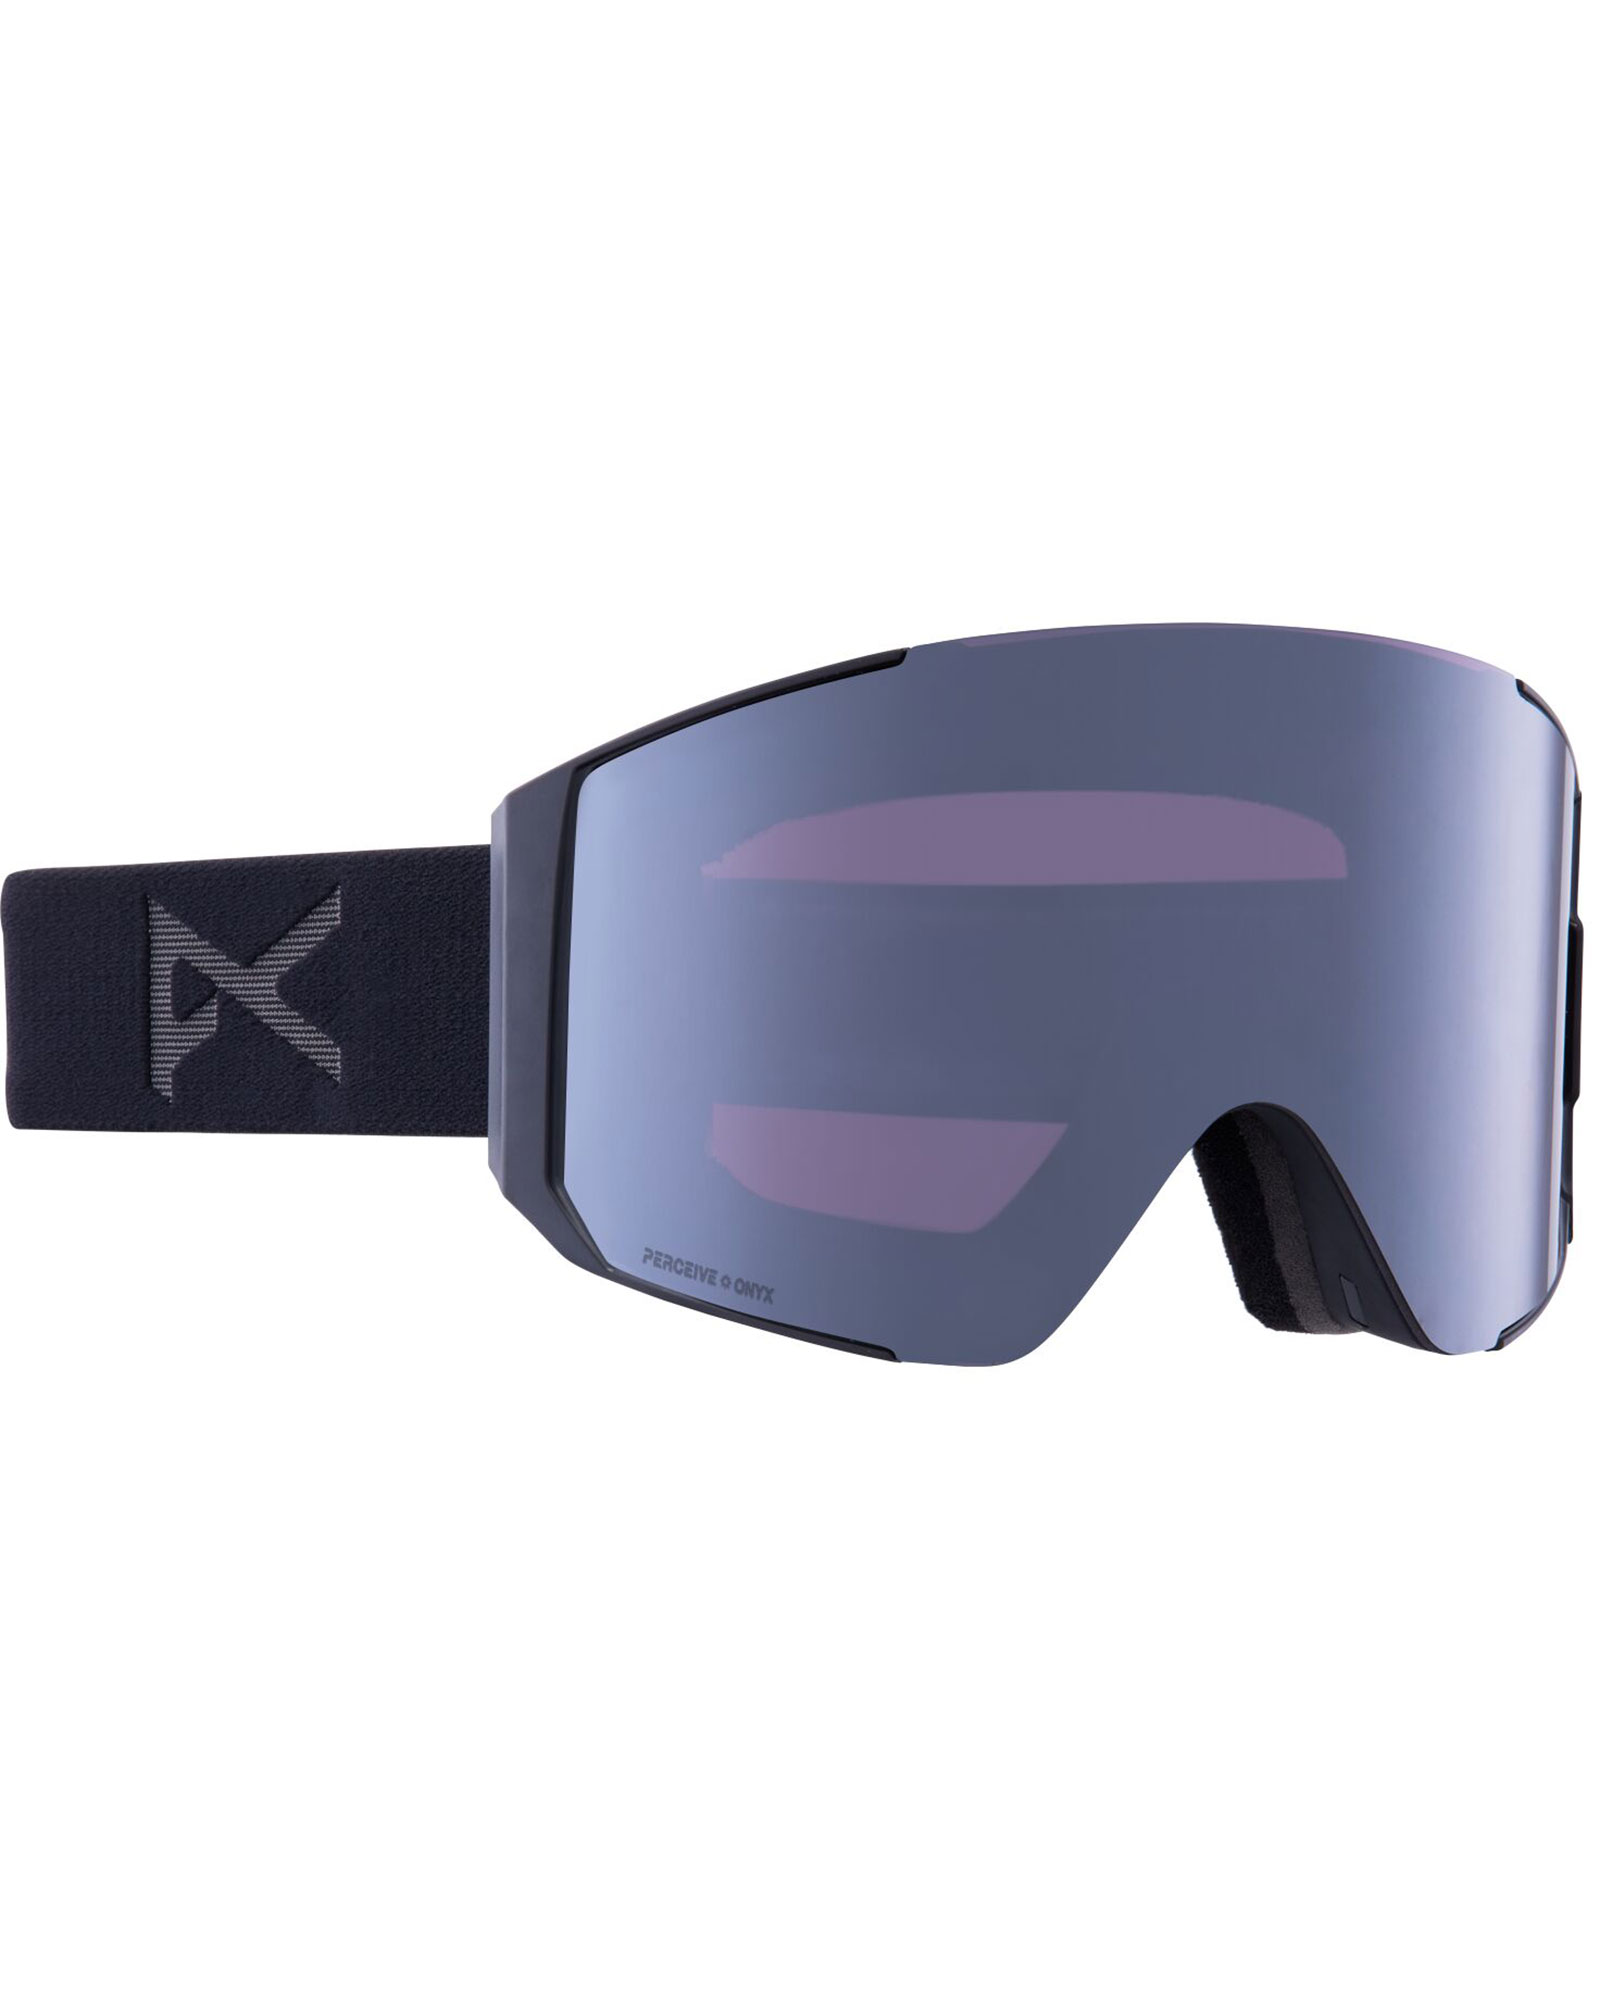 Anon Sync Smoke / Perceive Sunny Onyx + Perceive Variable Violet Goggles